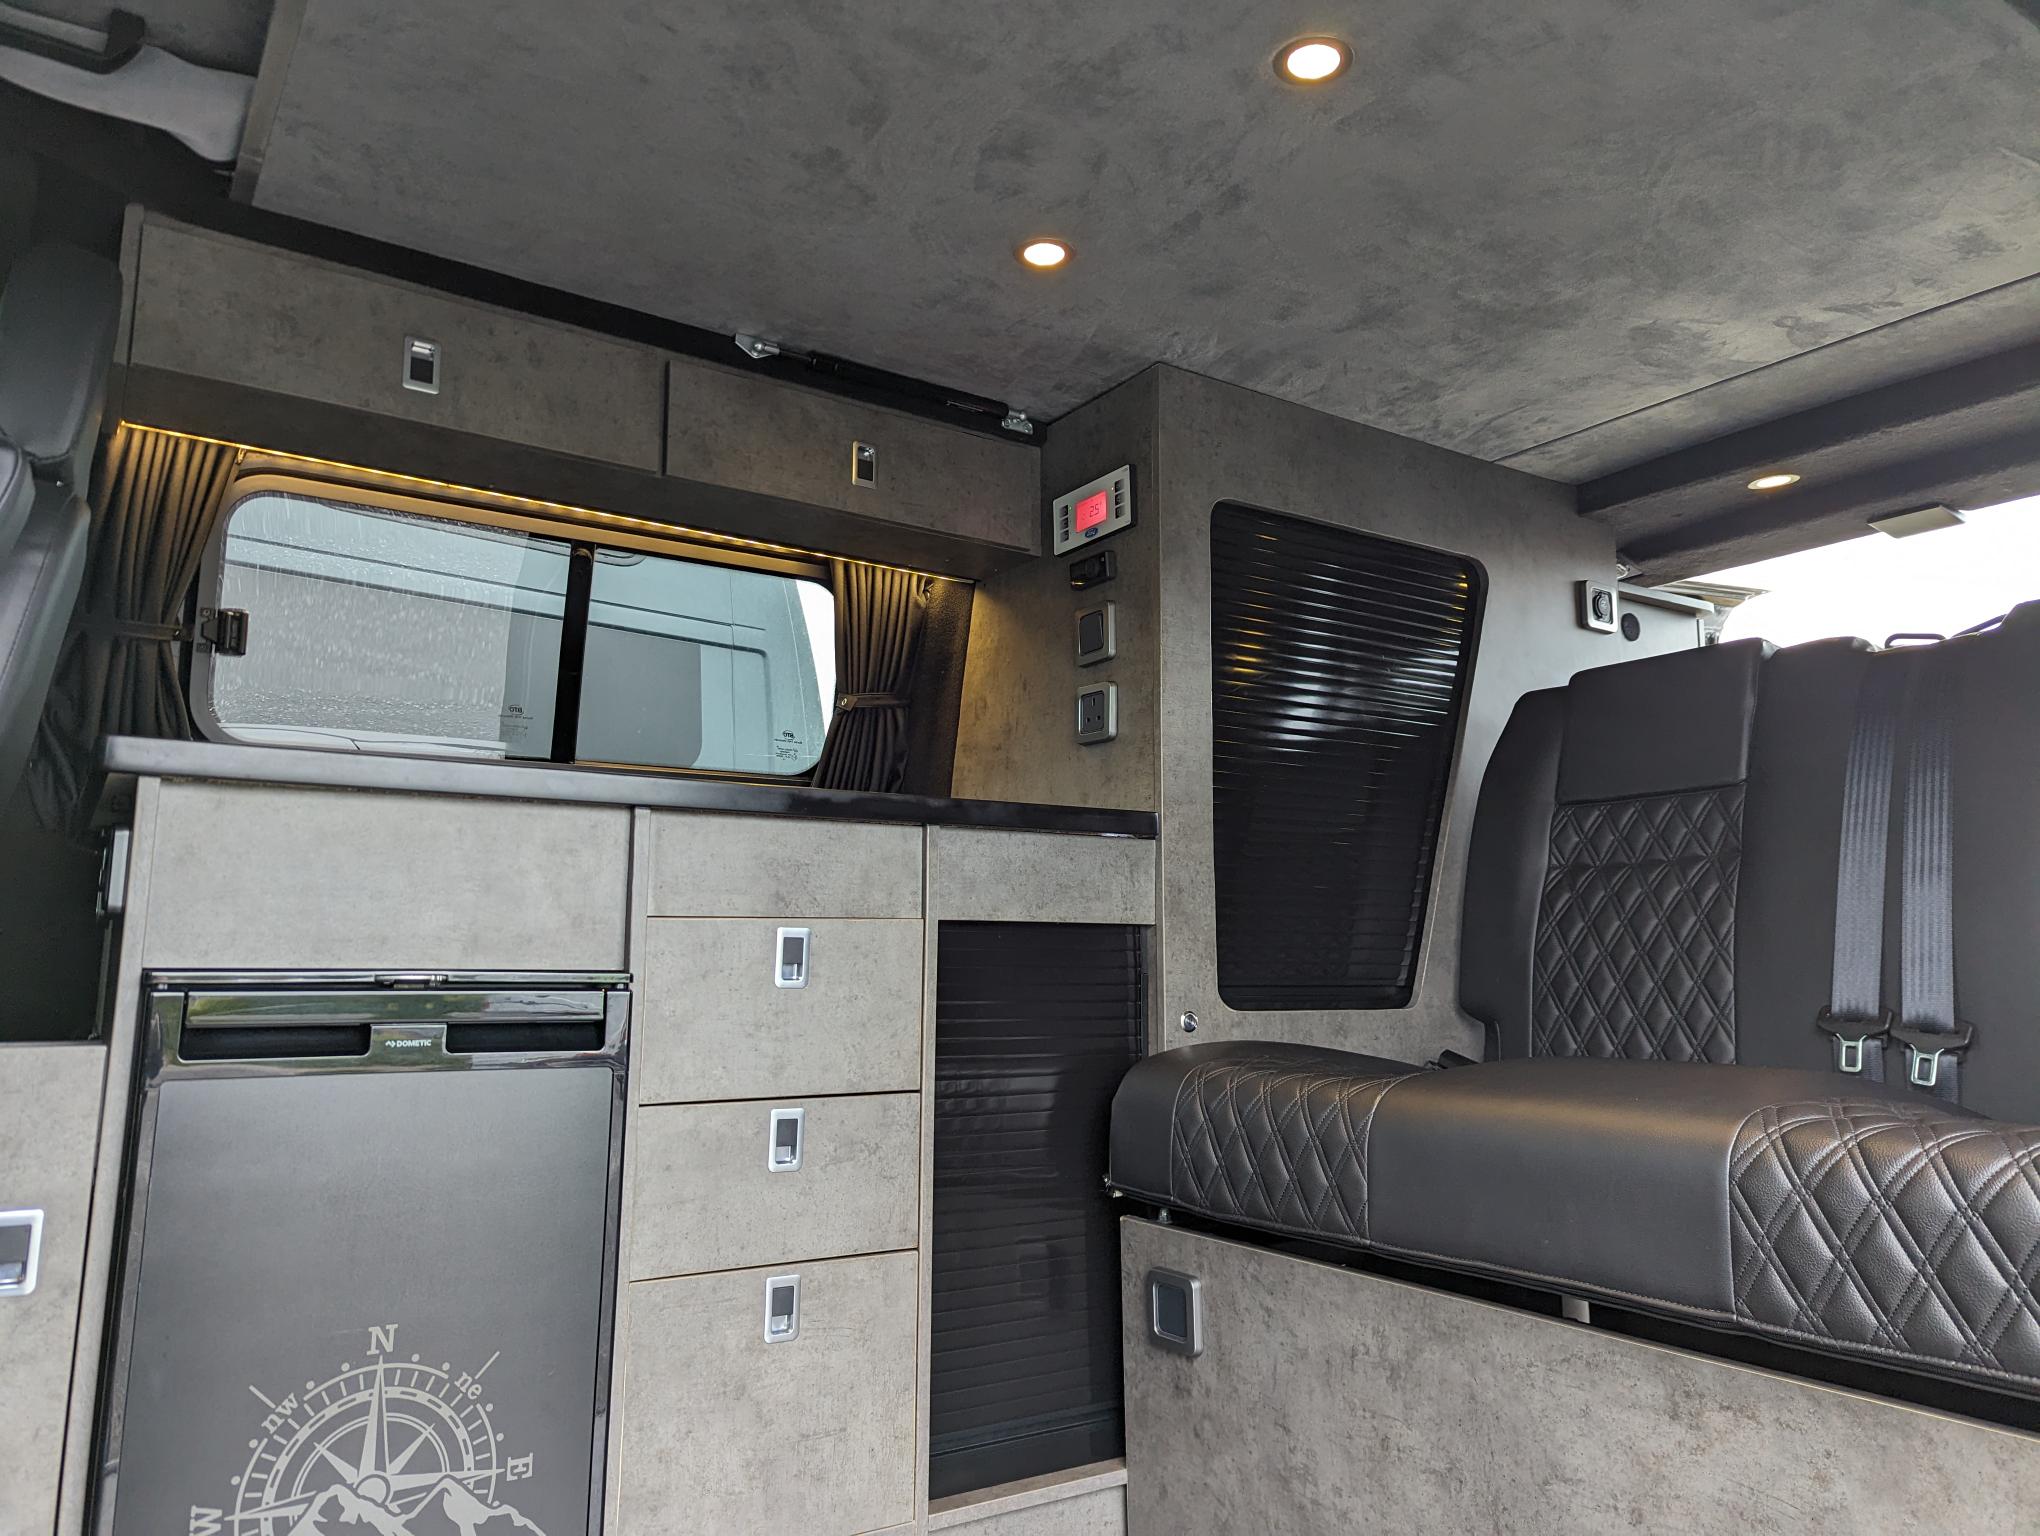 FORD TRANSIT CUSTOM LIMITED For Sale Thumb